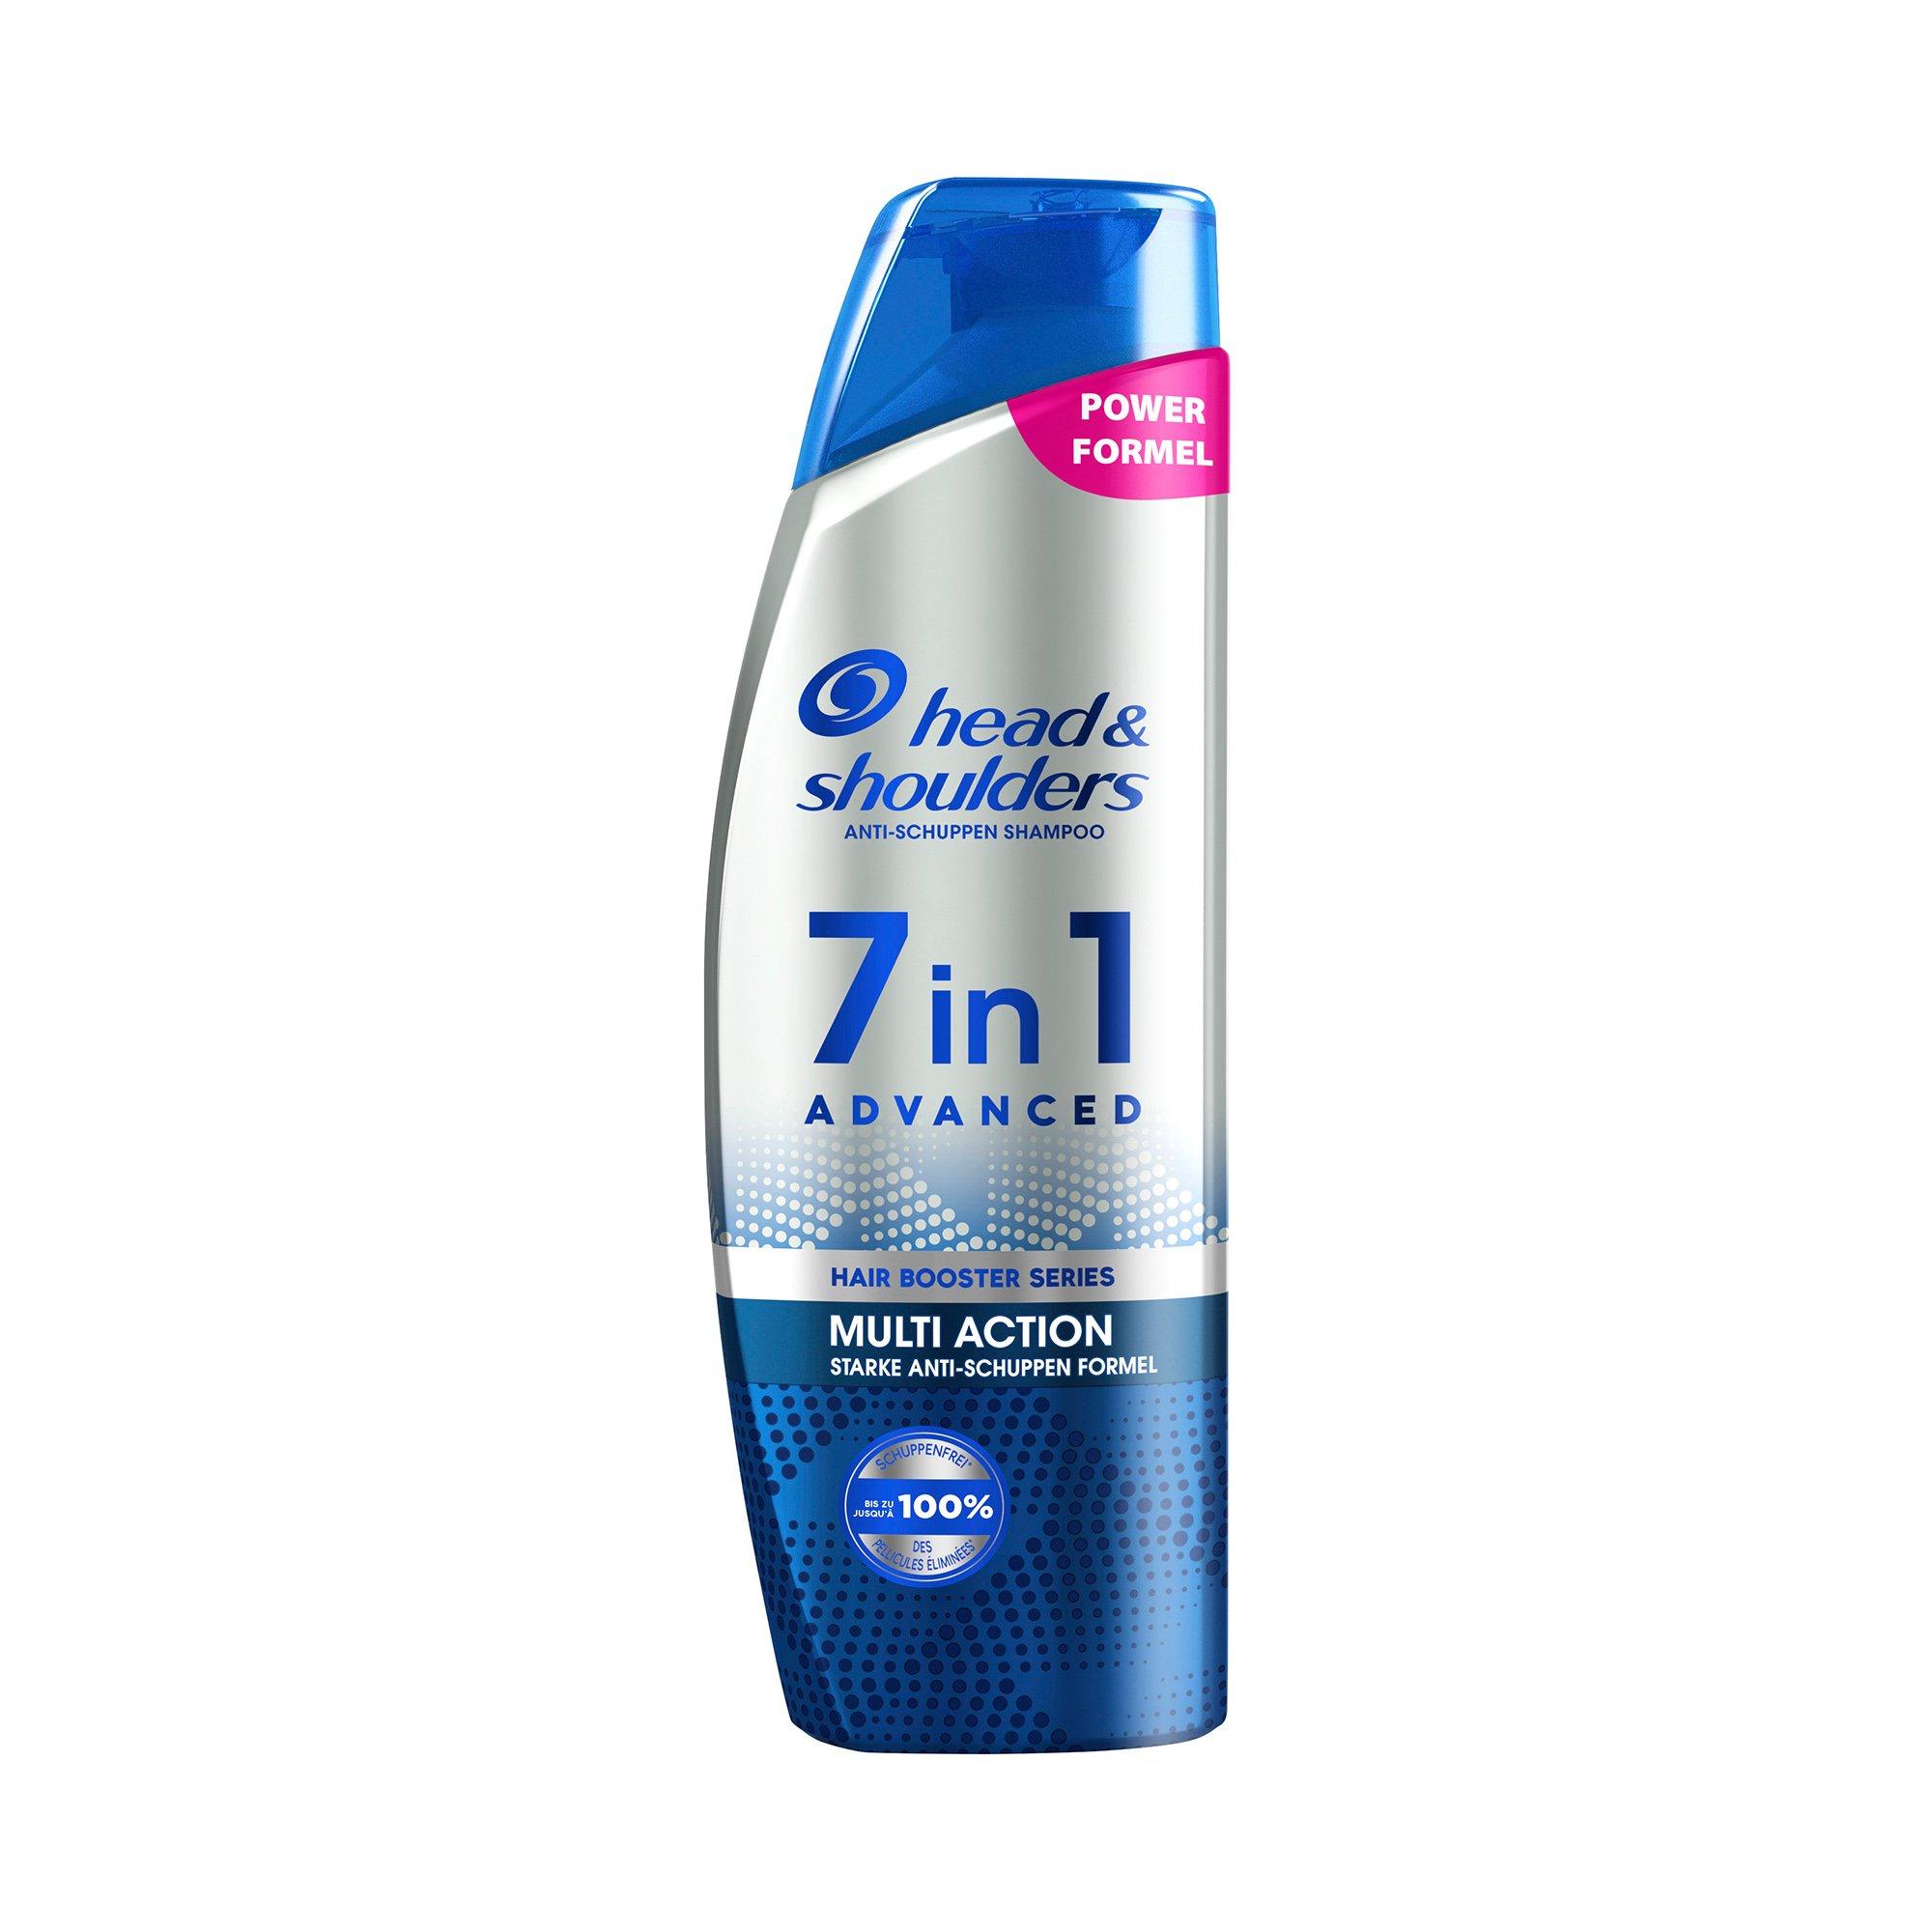 Image of head & shoulders 7in1 Anti-Schuppen-Shampoo mit Multi-Action-Technologie - 250ml